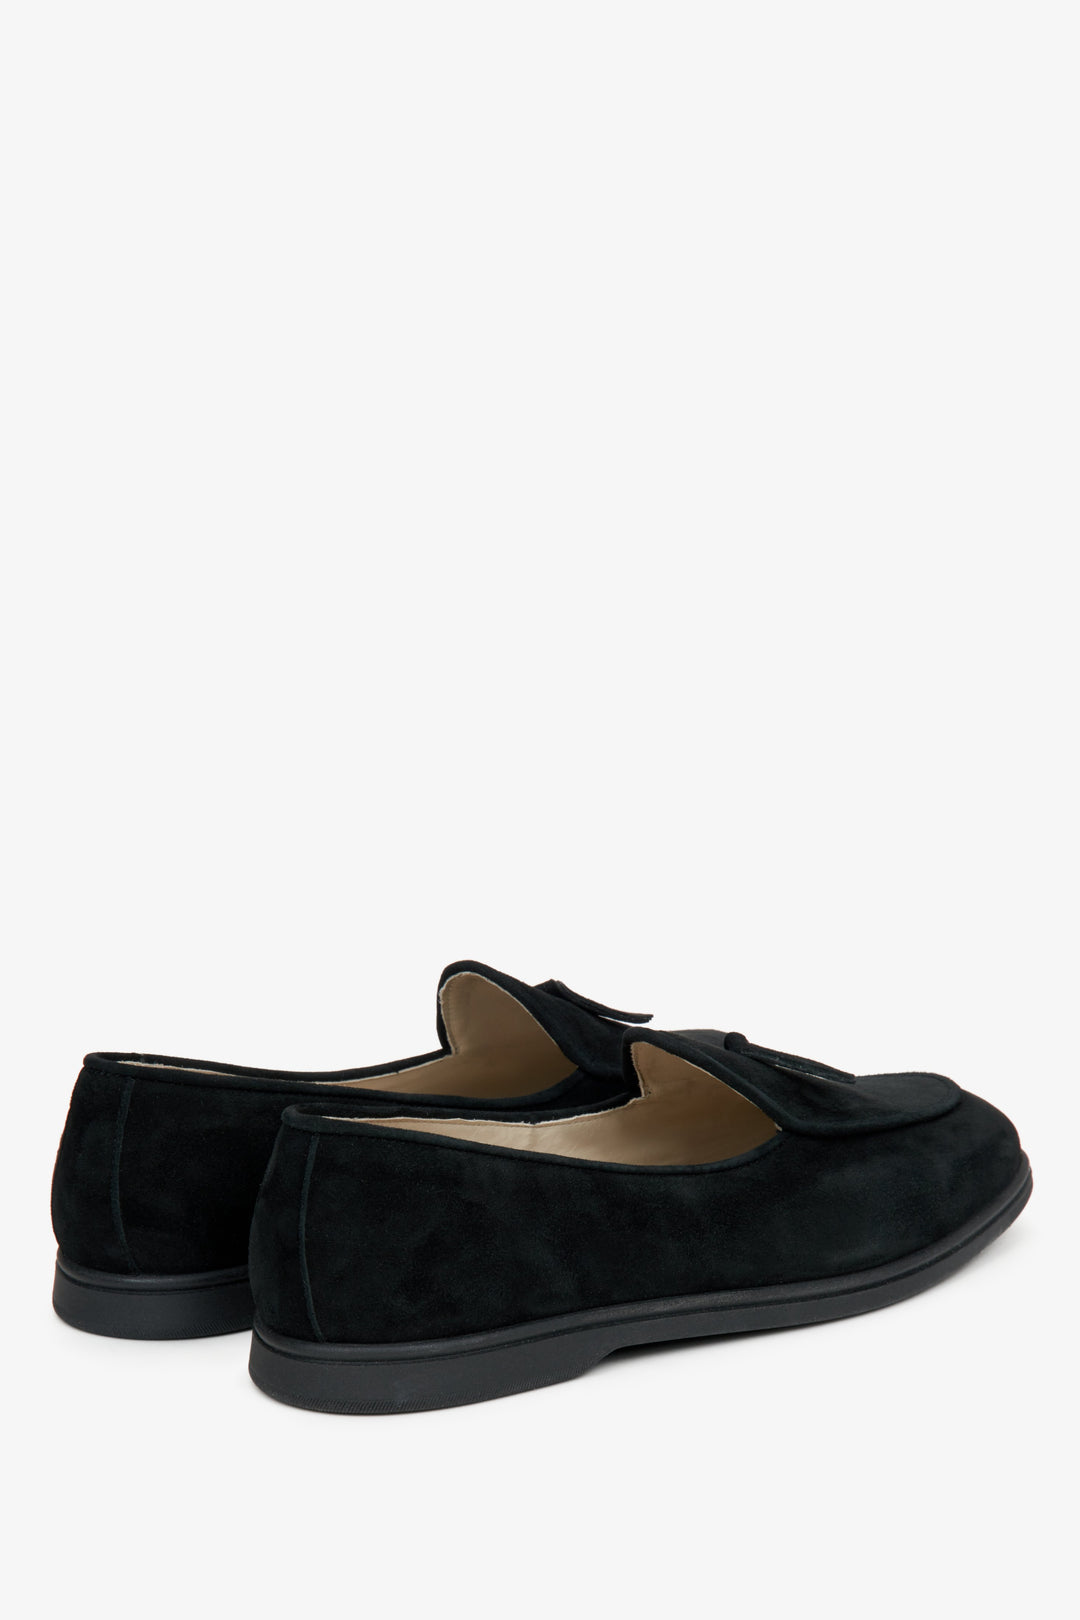 Women's black velour loafers by Estro - close-up on the heel counter and side profile of the shoes.